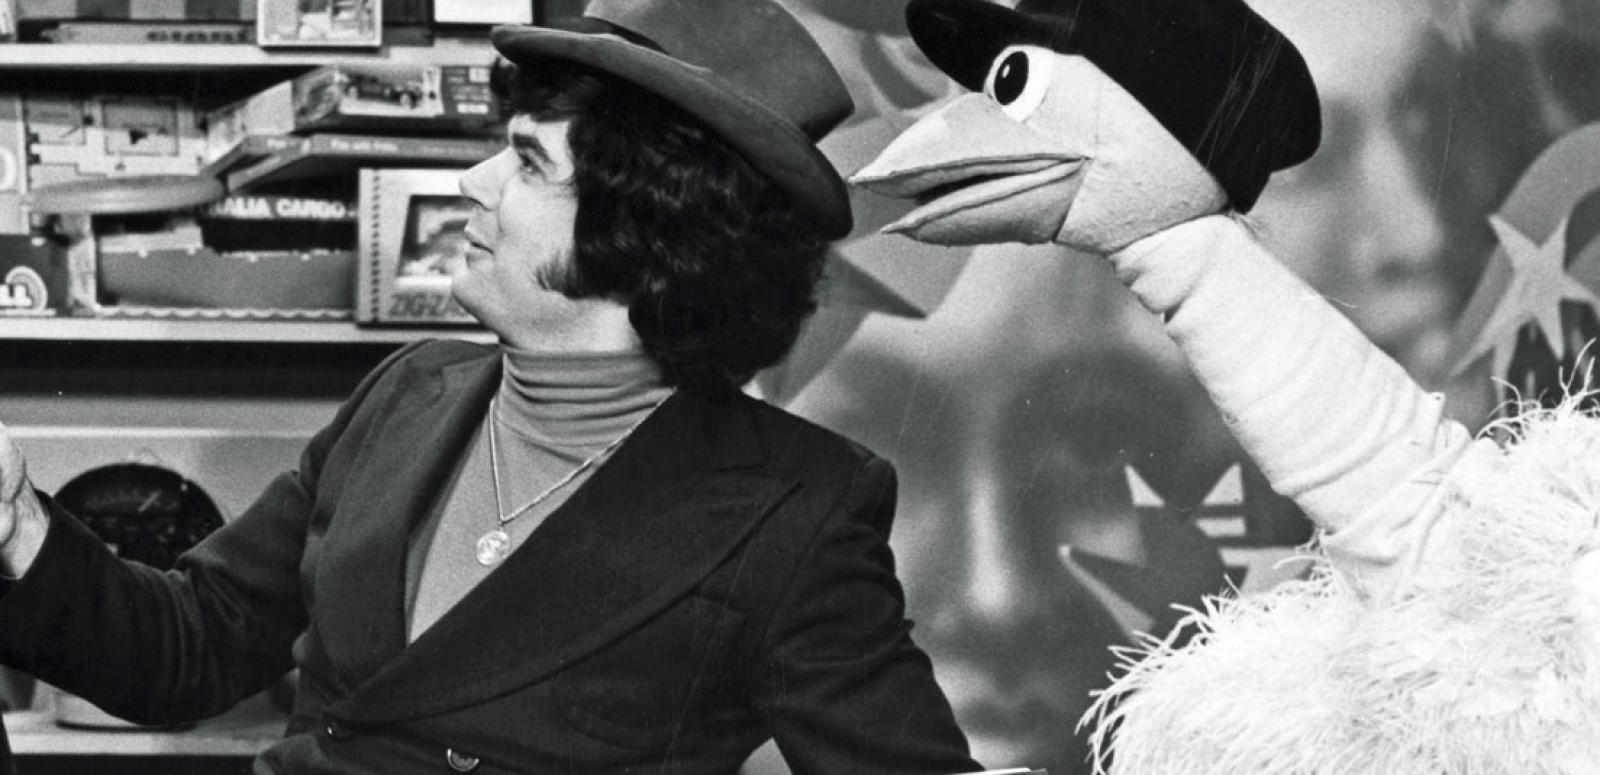 A man wearing a hat sitting next to an ostrich puppet who is also wearing a hat. They are both turned to their right.